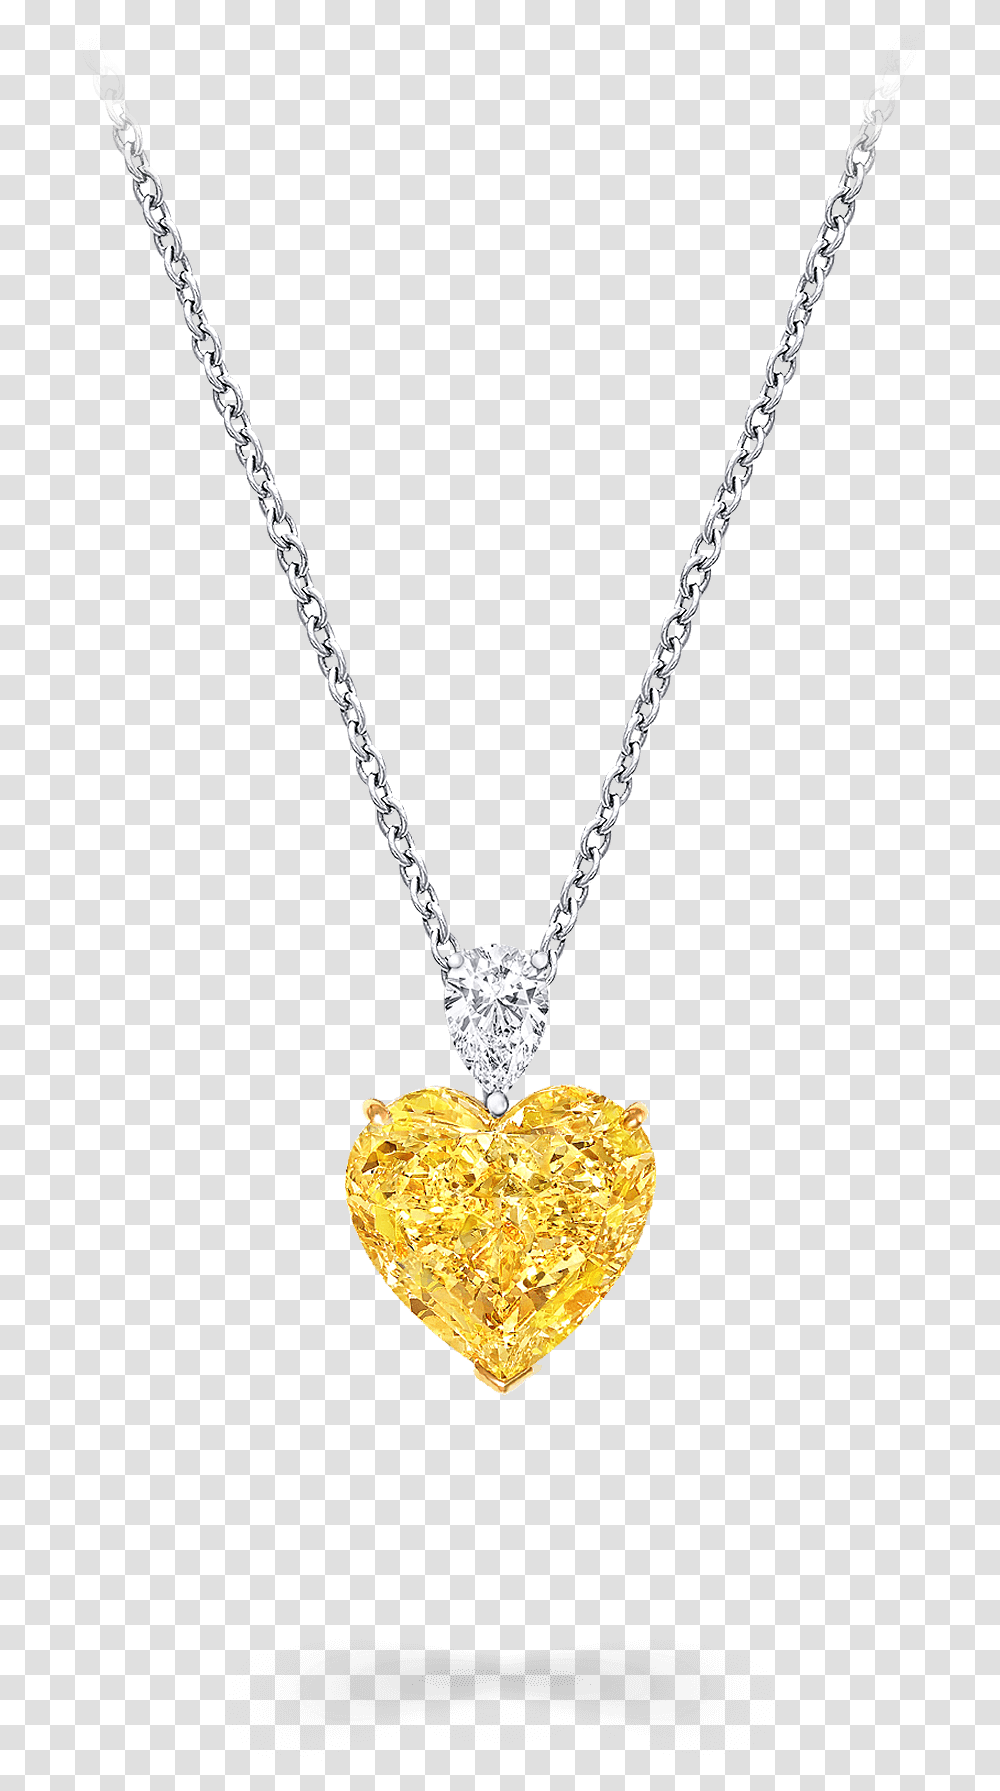 Heart Shape Yellow White Diamond Locket, Pendant, Necklace, Jewelry, Accessories Transparent Png